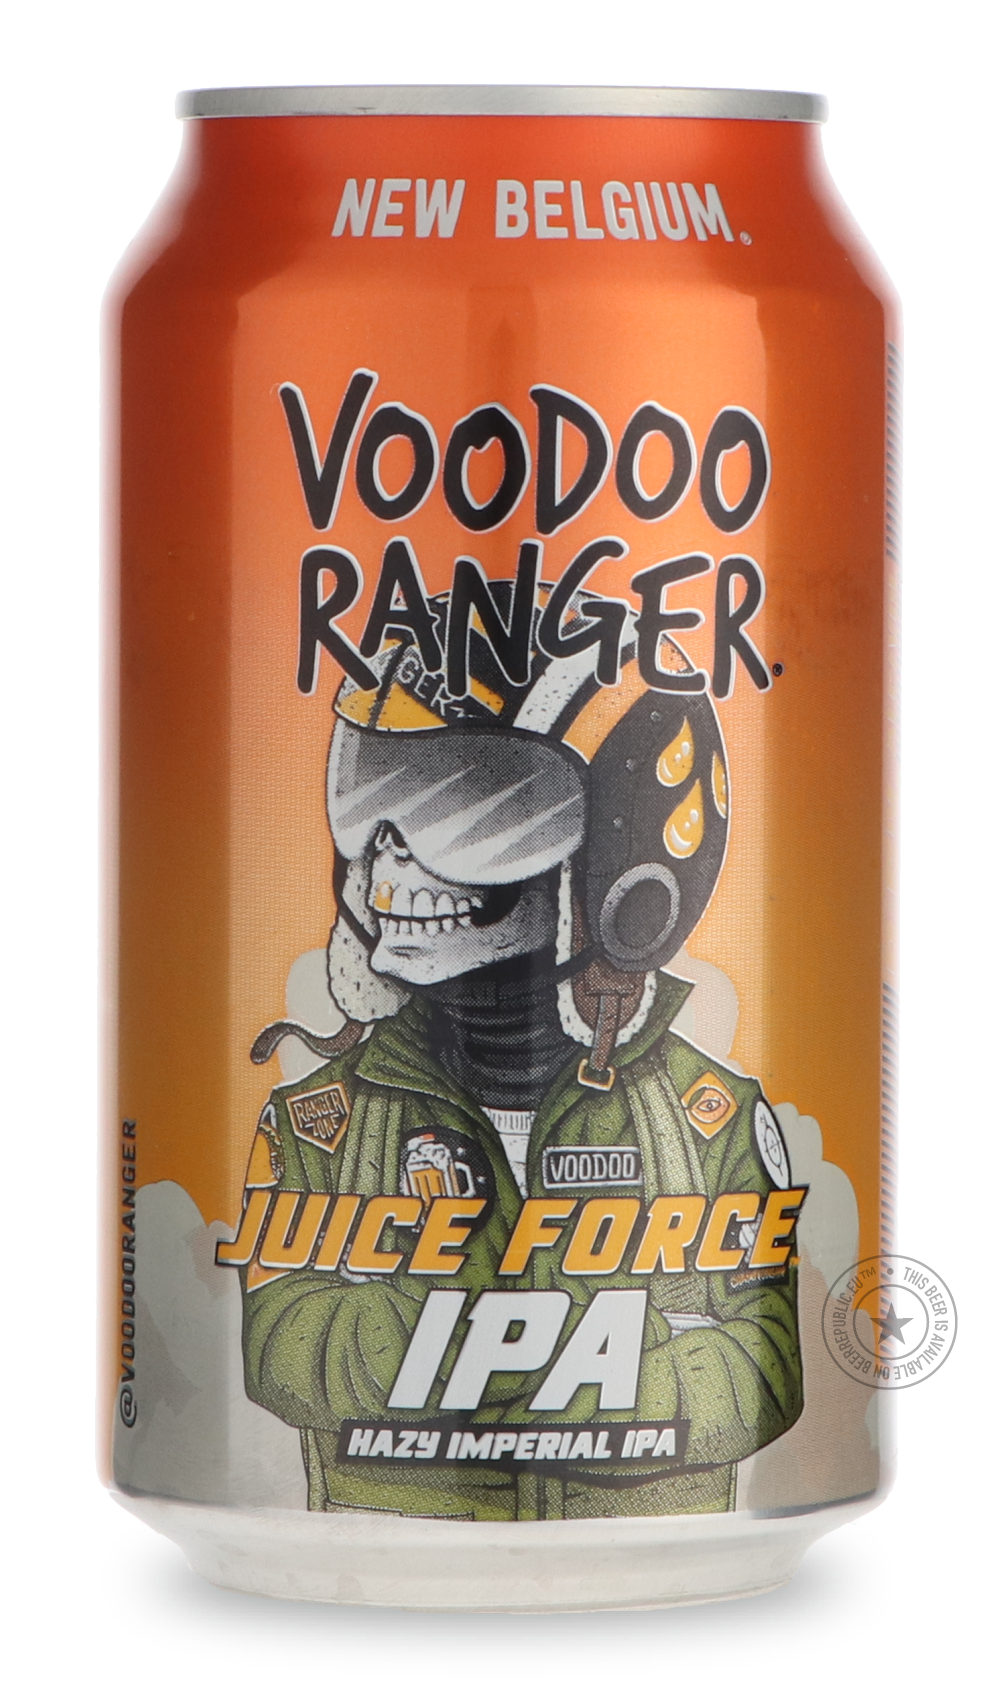 -New Belgium- Voodoo Ranger Juice Force-IPA- Only @ Beer Republic - The best online beer store for American & Canadian craft beer - Buy beer online from the USA and Canada - Bier online kopen - Amerikaans bier kopen - Craft beer store - Craft beer kopen - Amerikanisch bier kaufen - Bier online kaufen - Acheter biere online - IPA - Stout - Porter - New England IPA - Hazy IPA - Imperial Stout - Barrel Aged - Barrel Aged Imperial Stout - Brown - Dark beer - Blond - Blonde - Pilsner - Lager - Wheat - Weizen - A